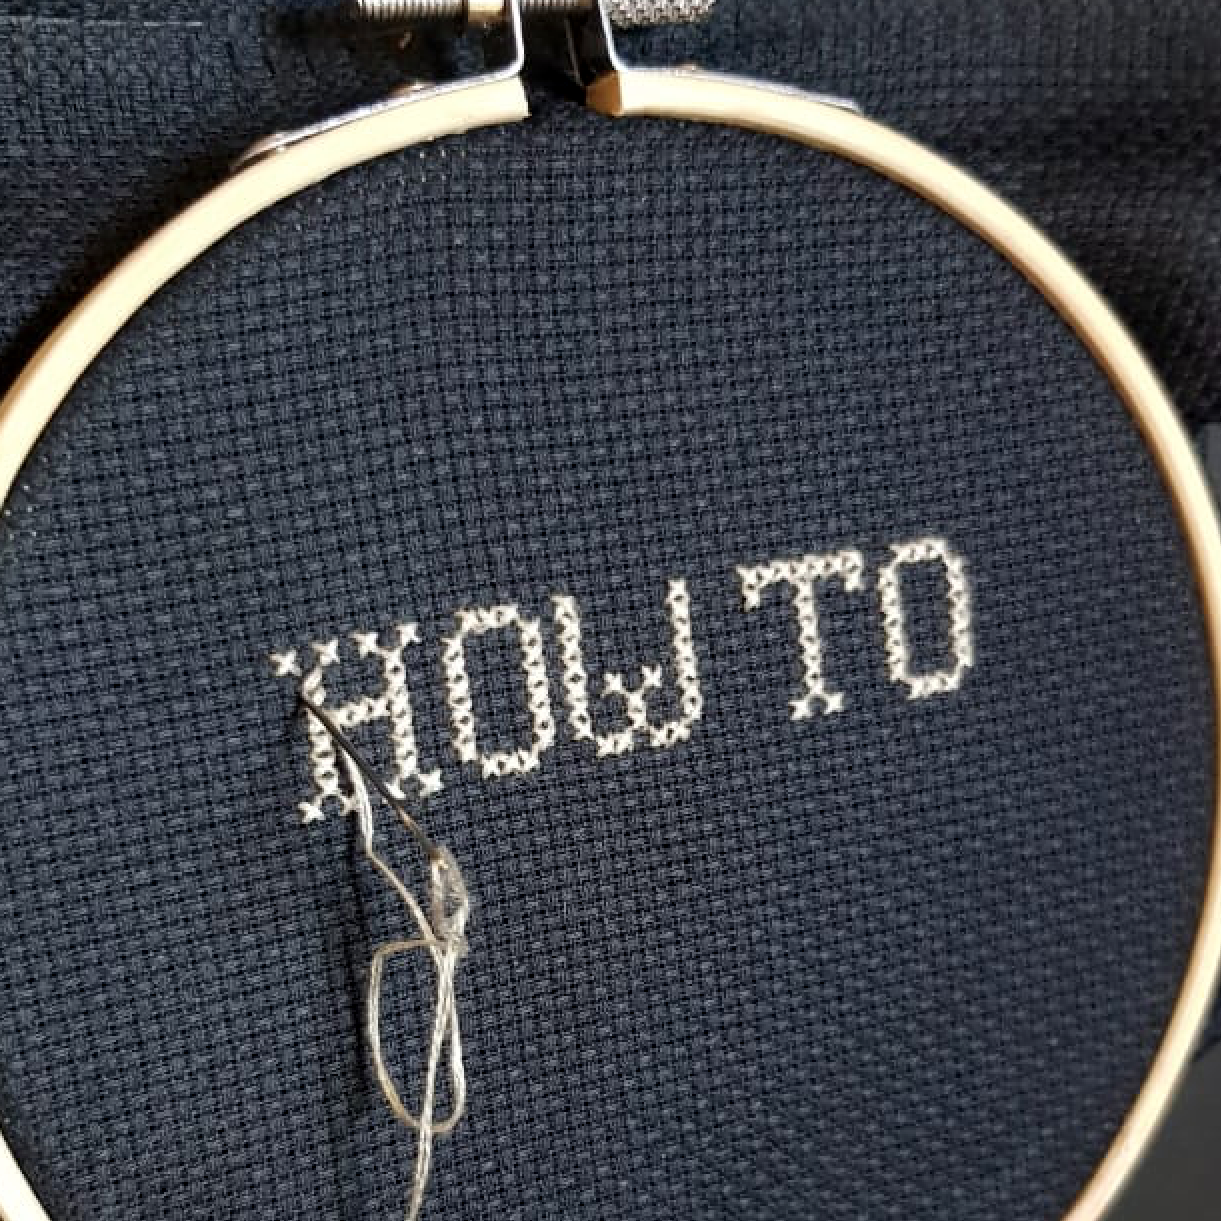 Create your own cross-stitch pattern